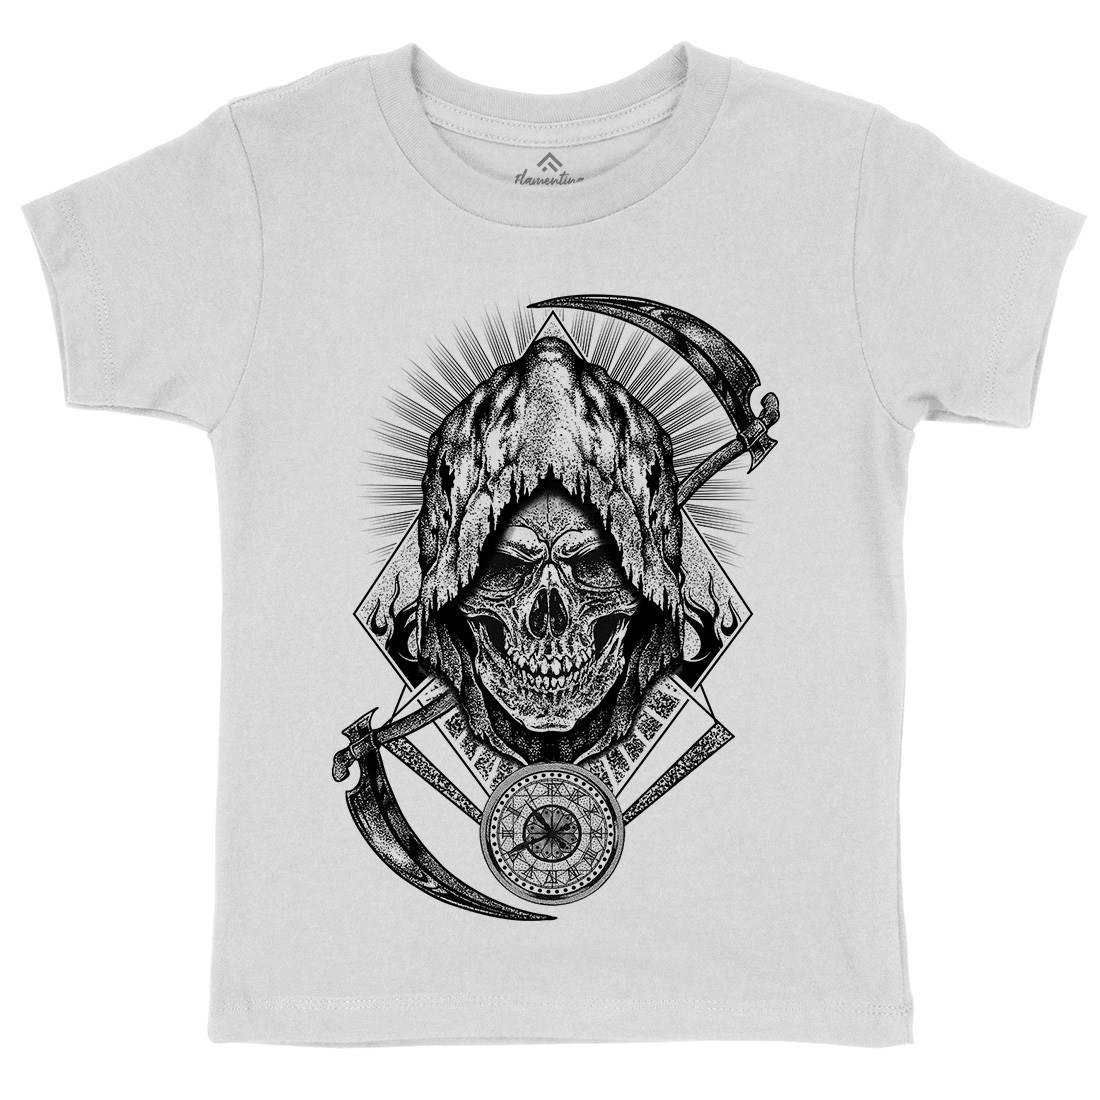 Your Time Has Arrived Kids Crew Neck T-Shirt Horror D099